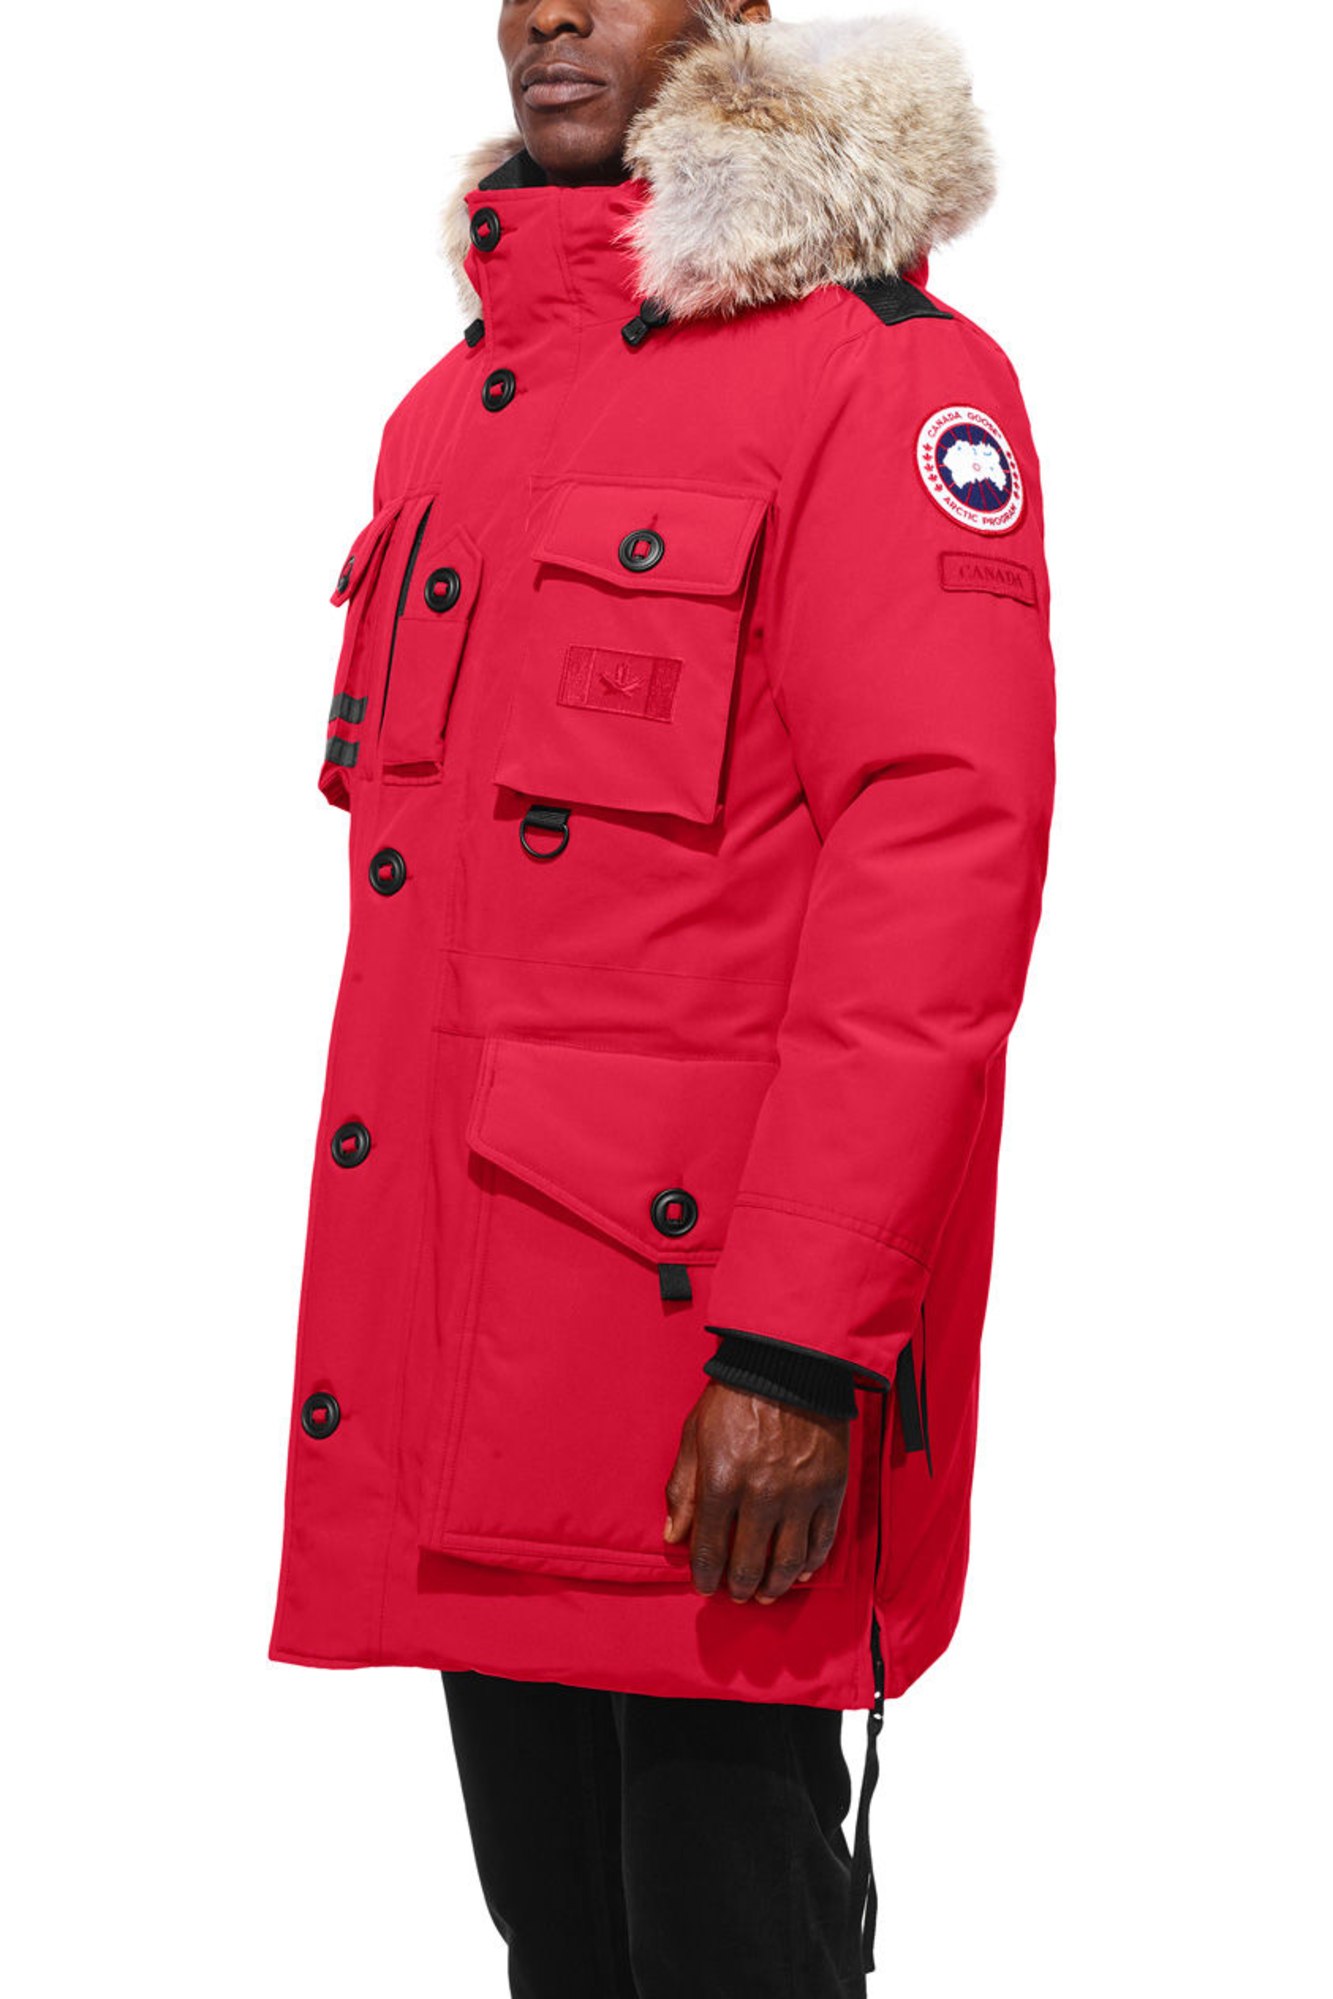 Canada Goose Special Edition Jackets Top Sellers, 54% OFF | www 